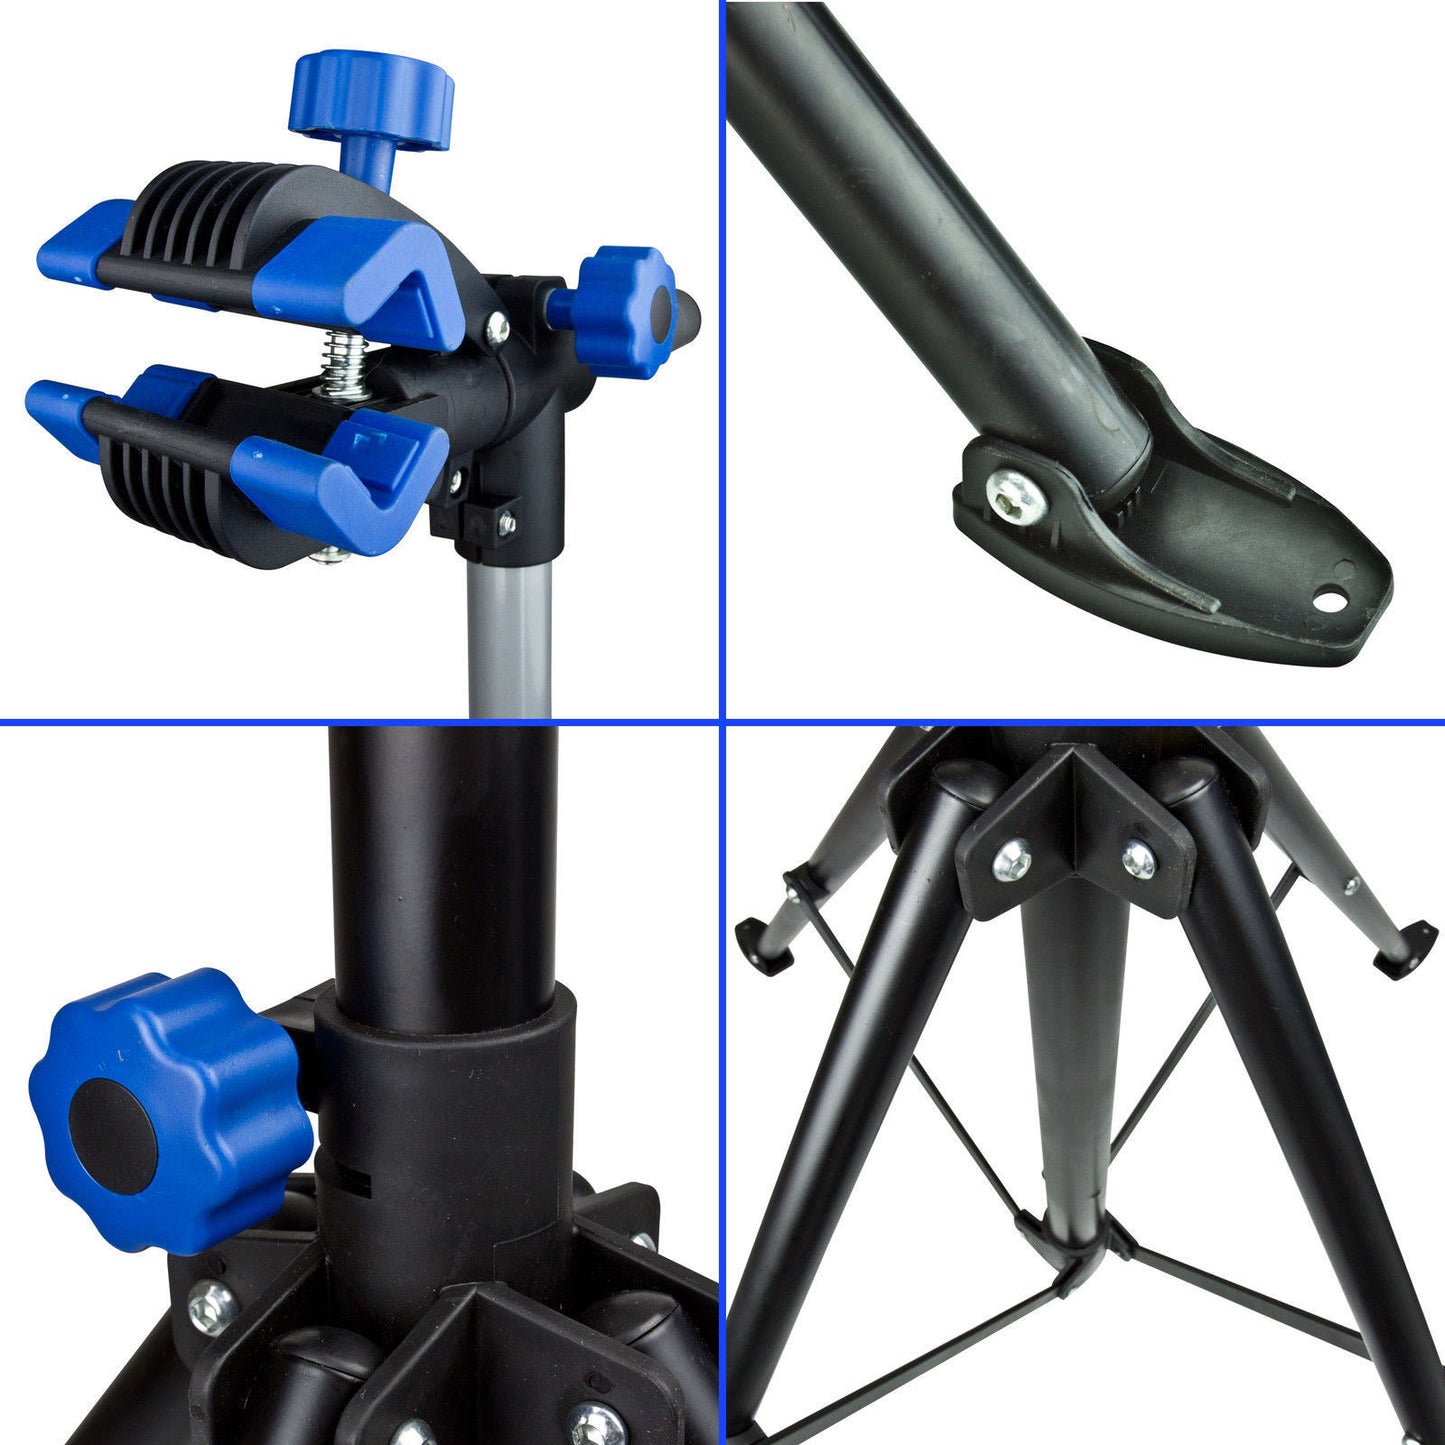 Bike Repair Work Stand With Bonus Tool Tray For Home Bicycle Mechanic Quick Release Blue Road bike MTB